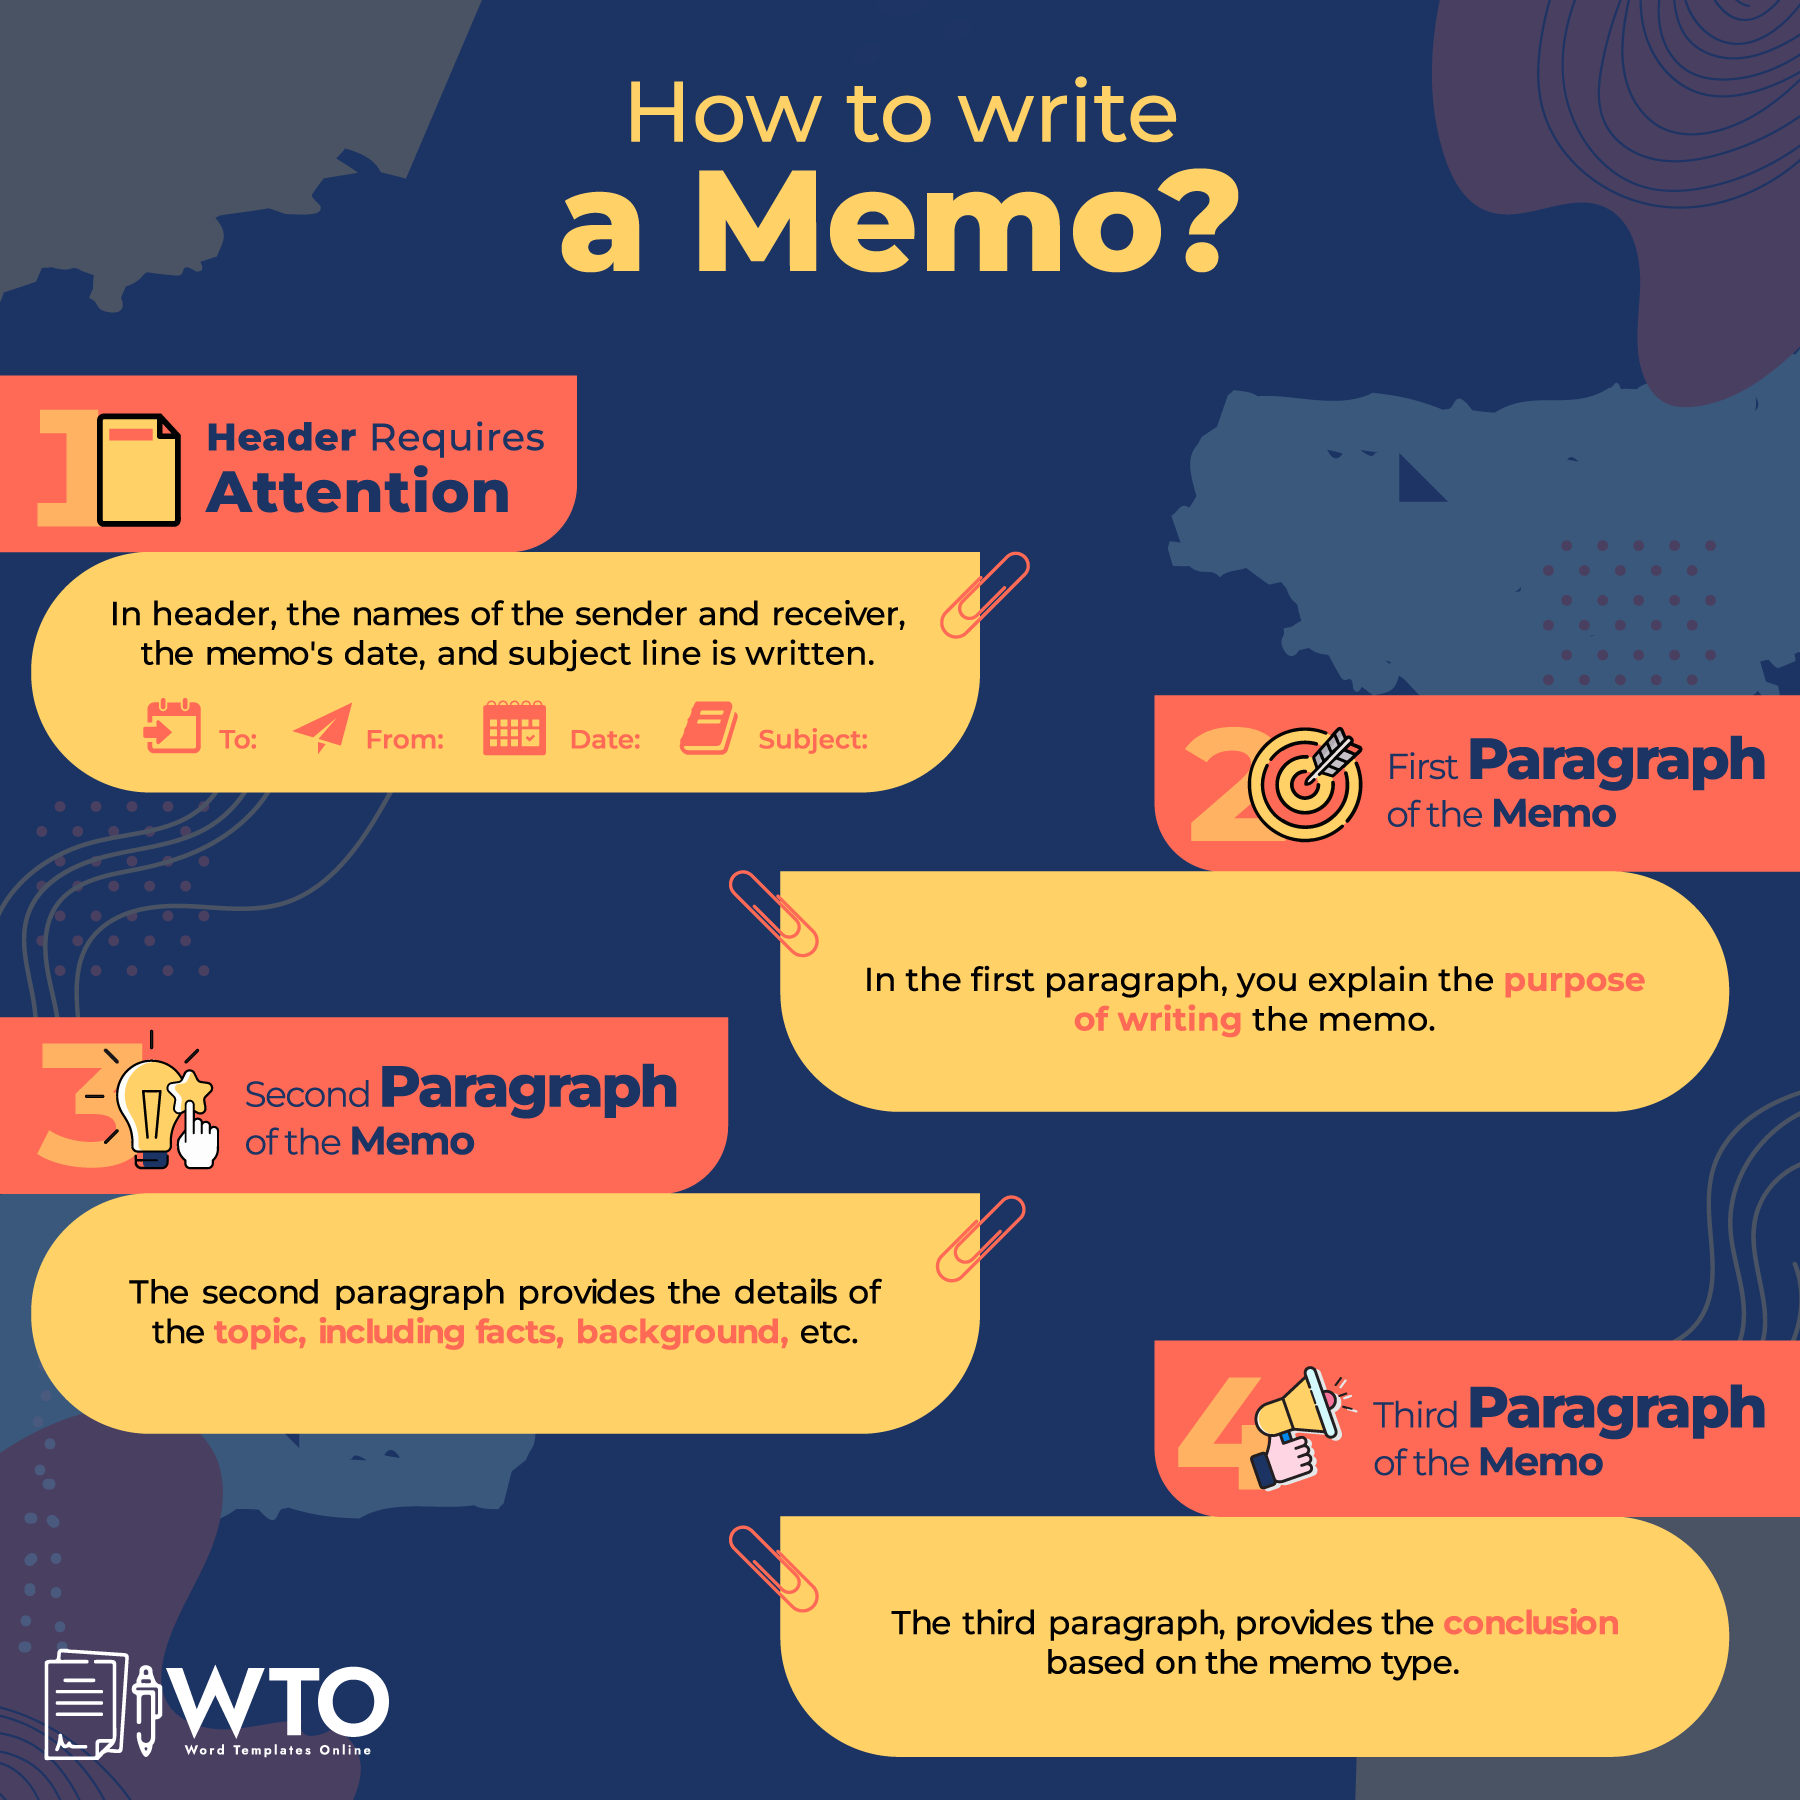 This infographic is about how to write a Memo.